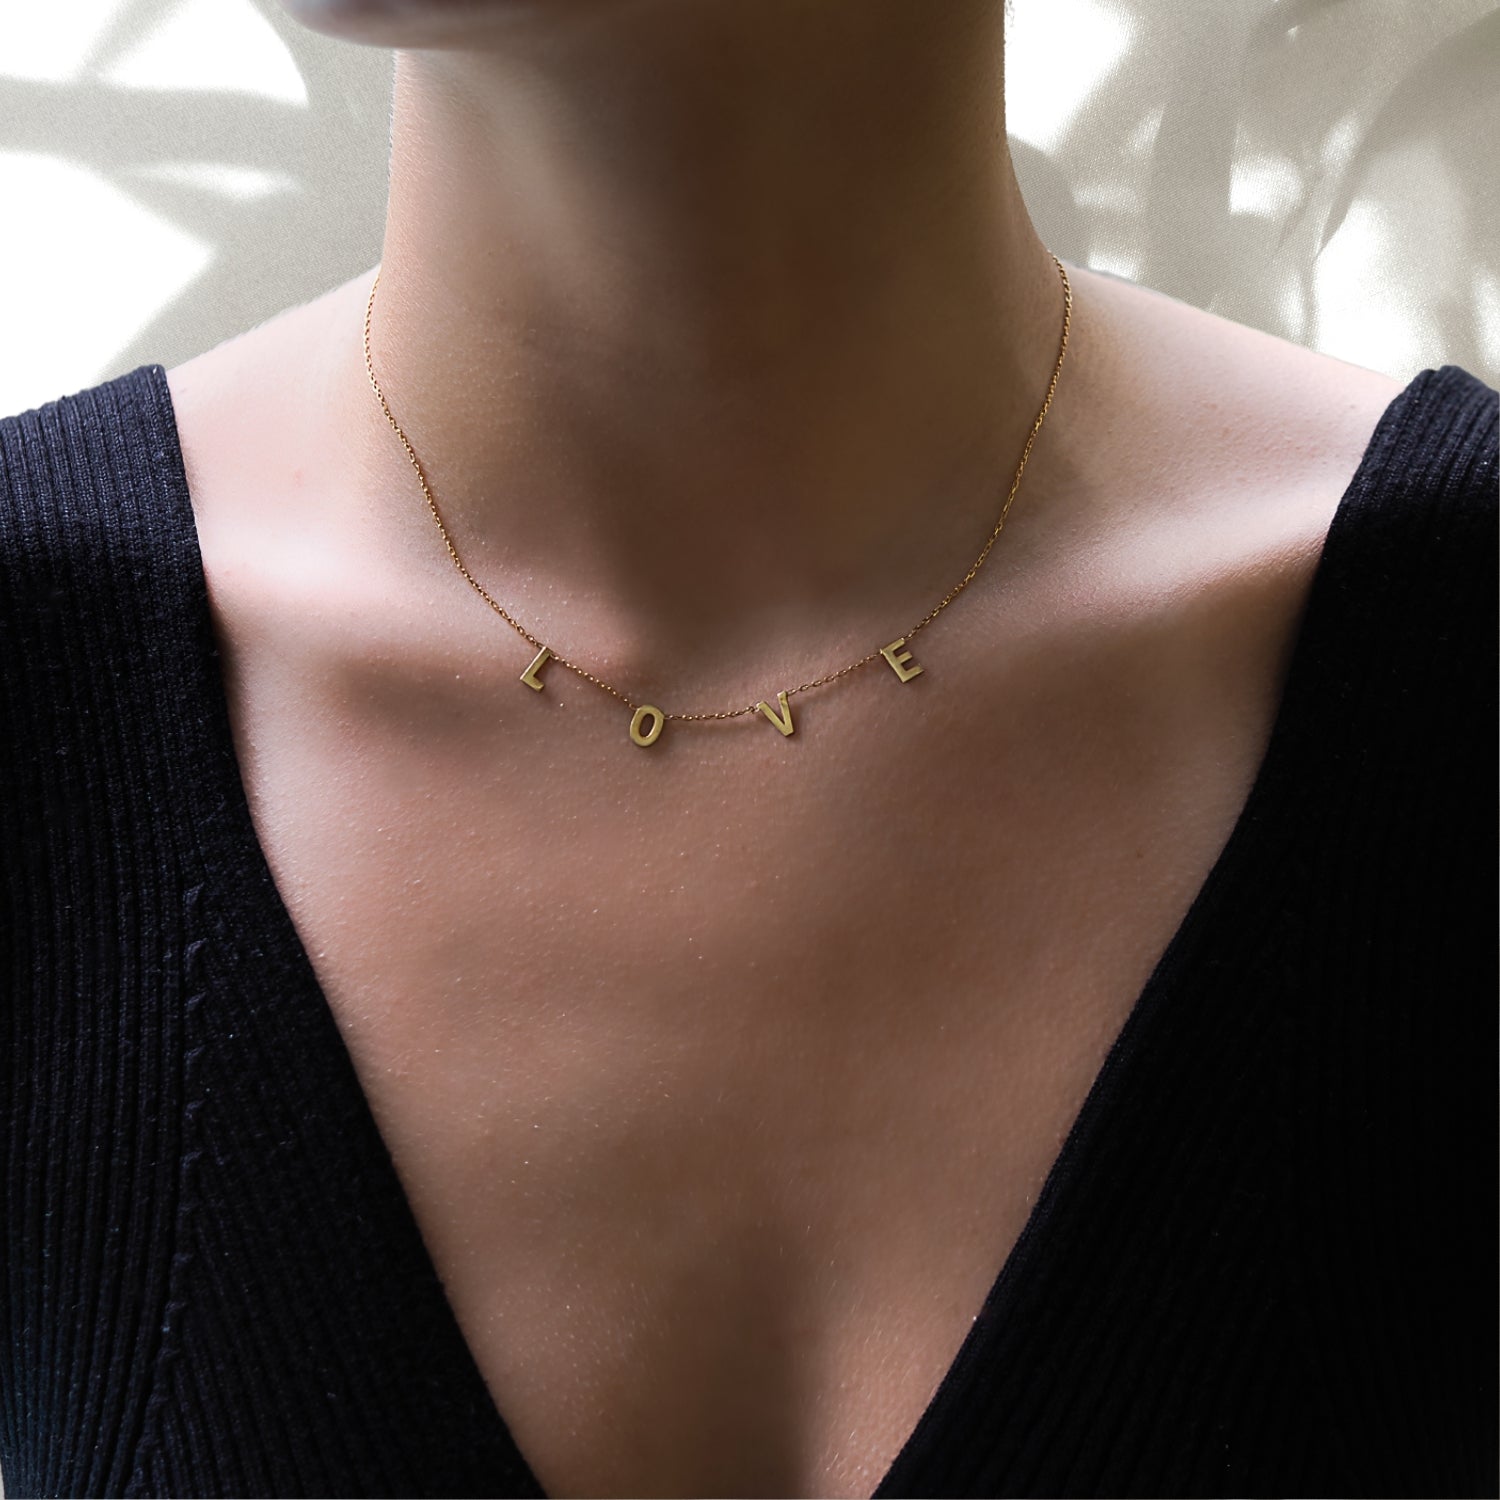 See how the Love Necklace enhances our model&#39;s natural beauty, adding a touch of elegance and sophistication to her neckline.